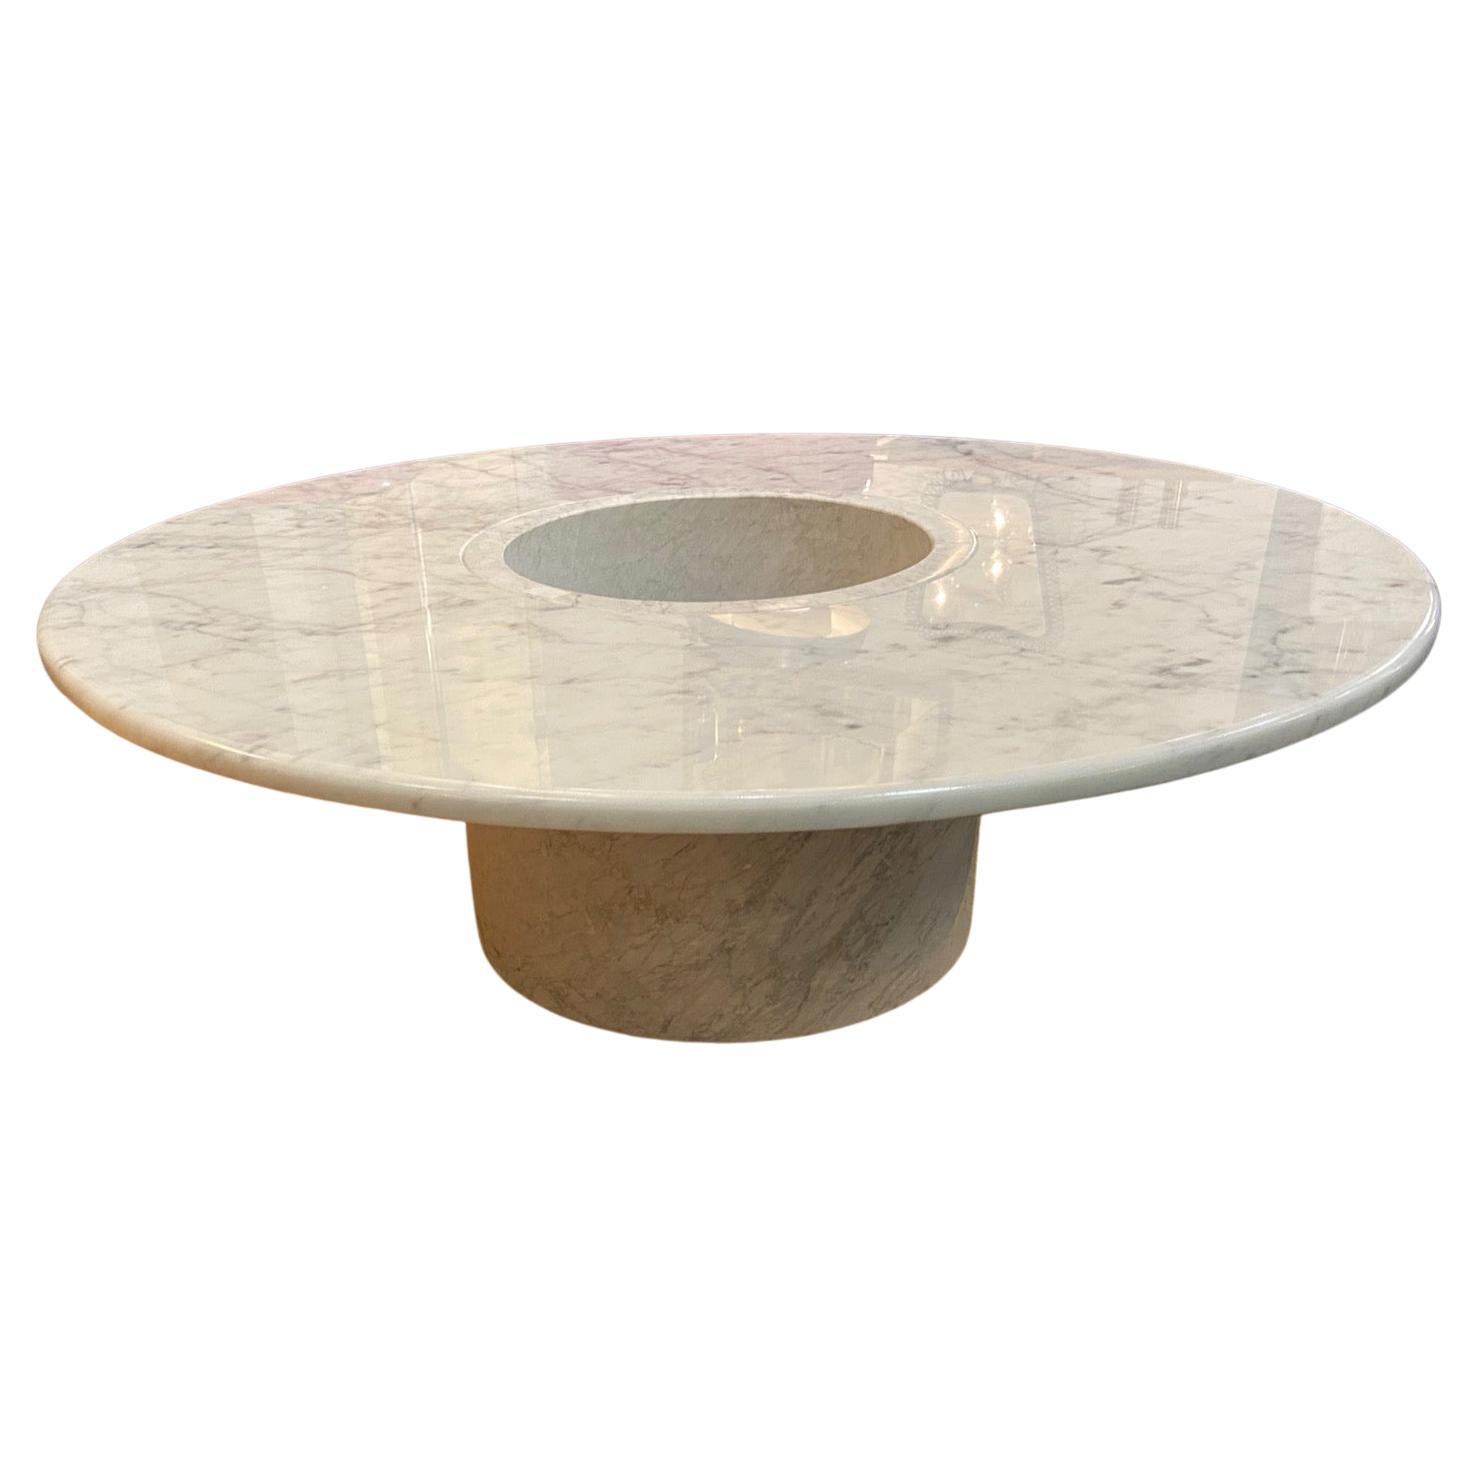 An unusual Italian 1970's circular Carrara marble coffee table with a central hole which could be used for either plants or a champagne bucket etc... It is made of 2 pieces, the supporting cylinder and the circular top. This would reduce the